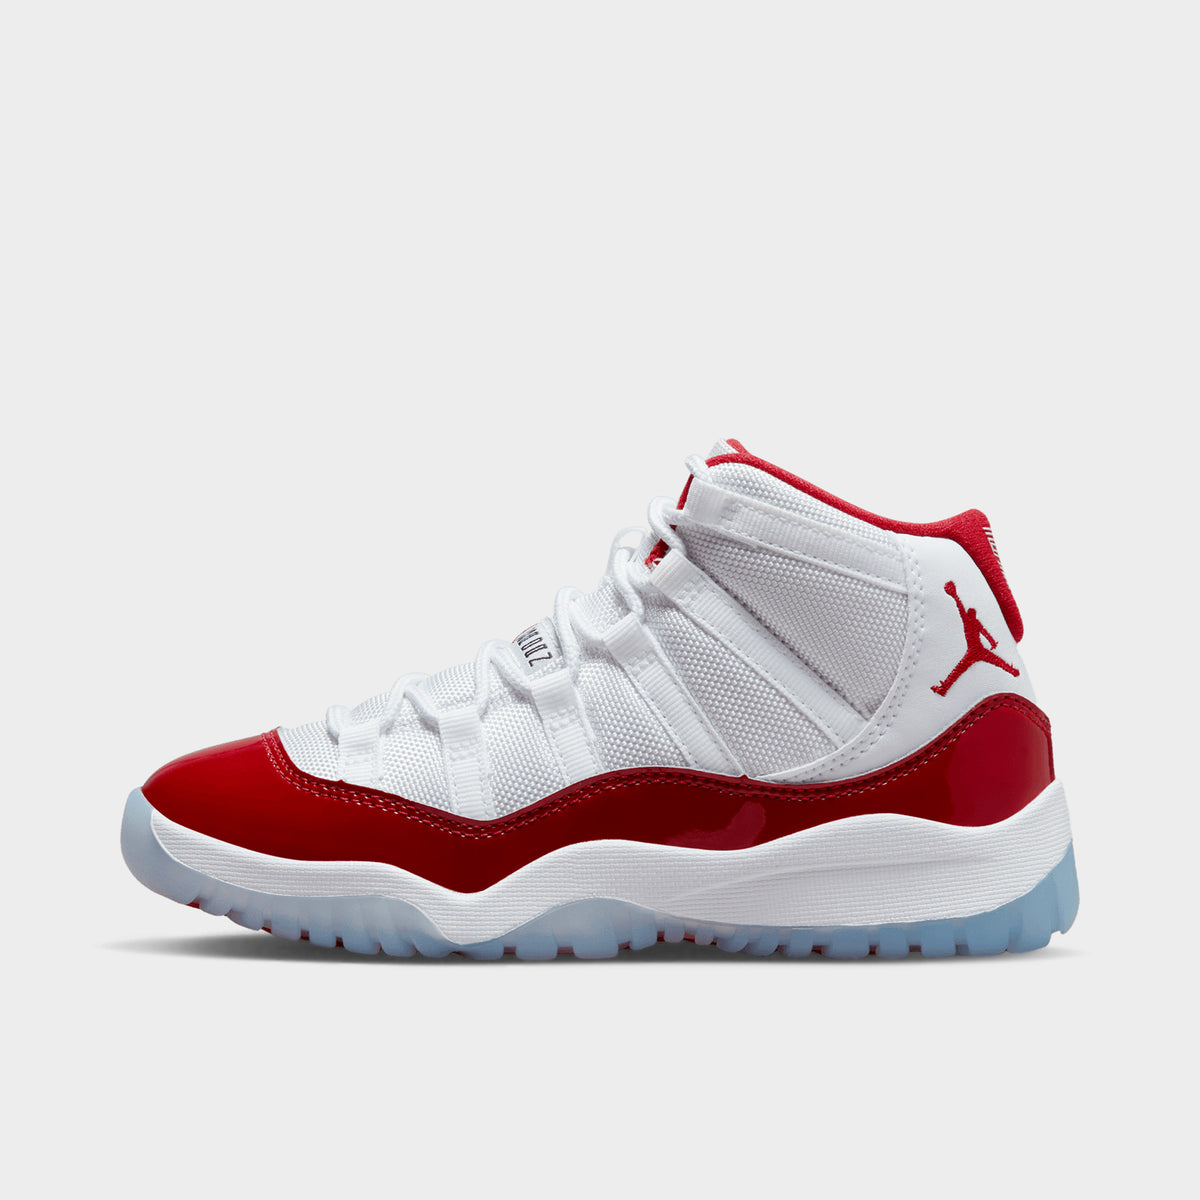 how much is the jordan retro 11